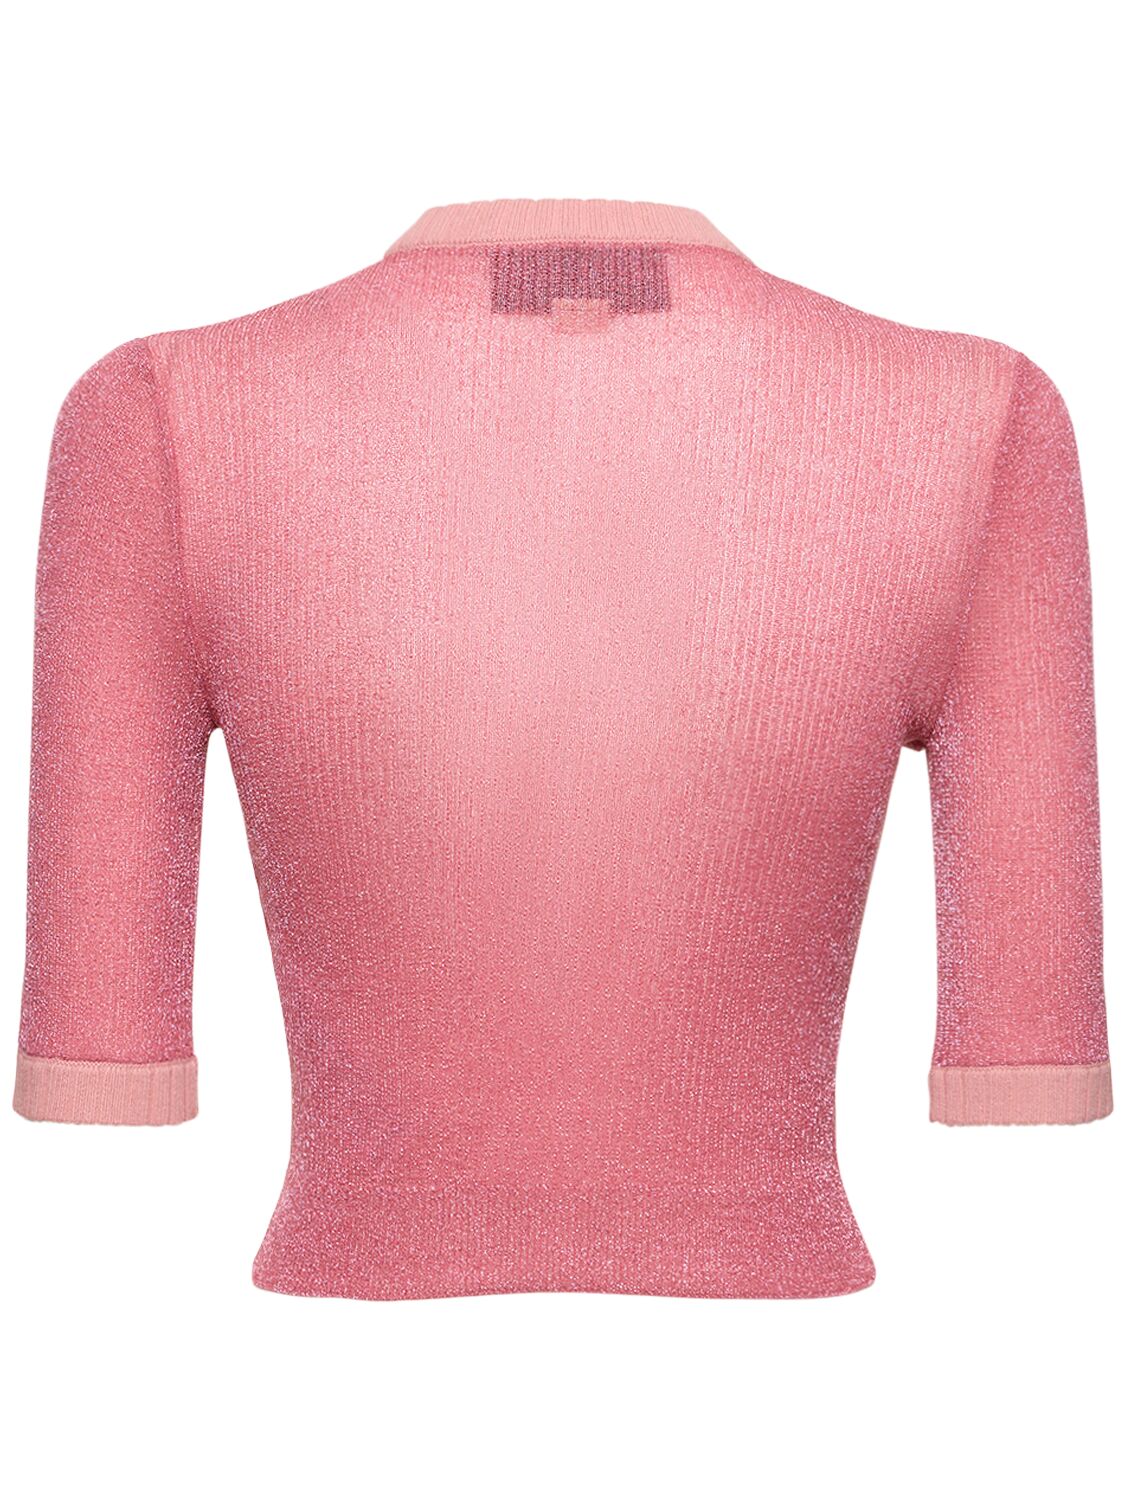 Shop Gucci Nylon Lamé Knit Top In Rosewood Pink